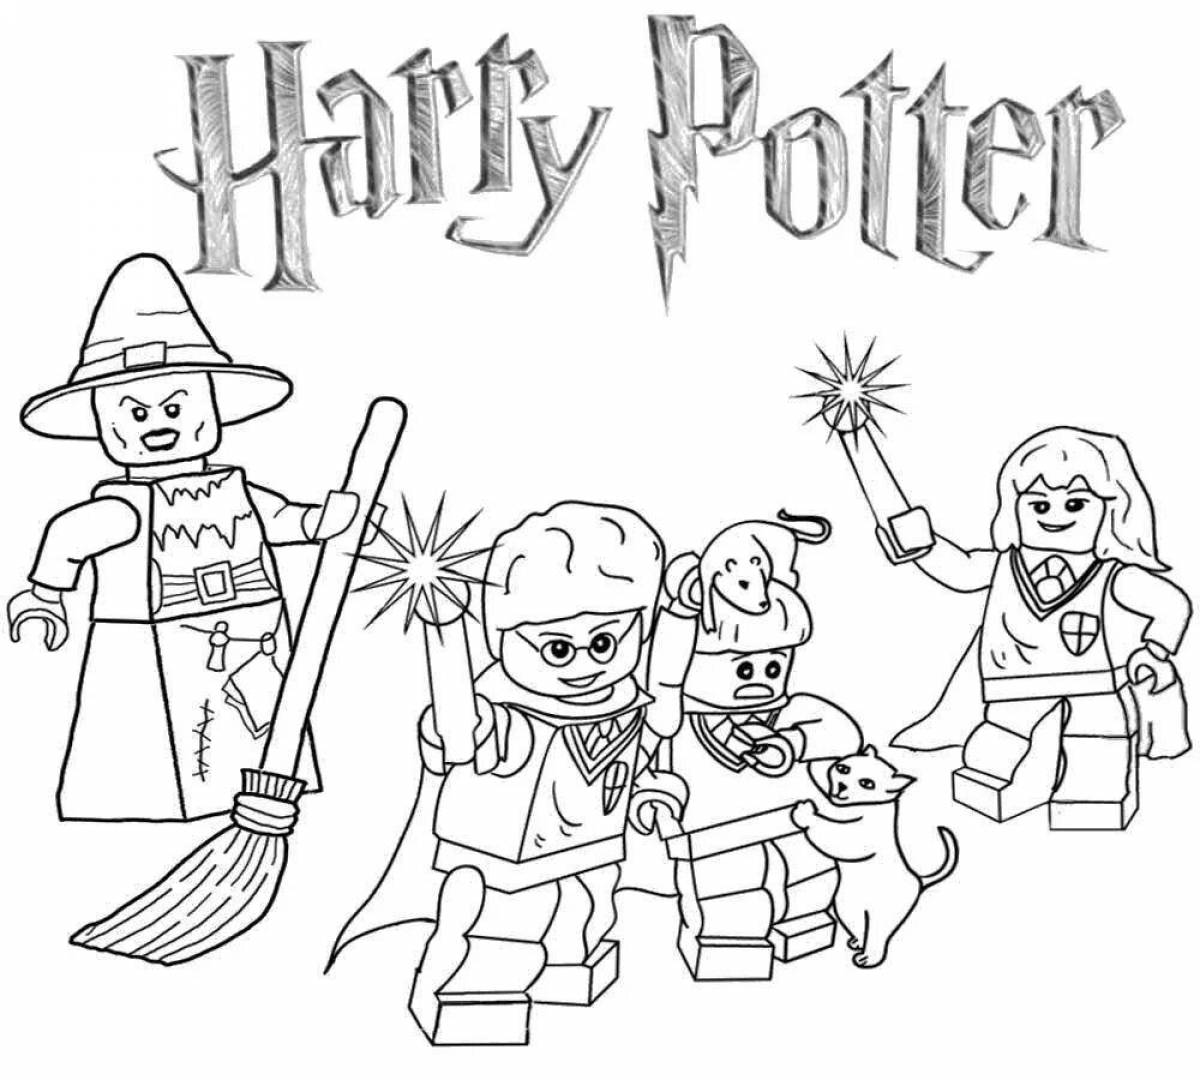 Bright lego zombie coloring page